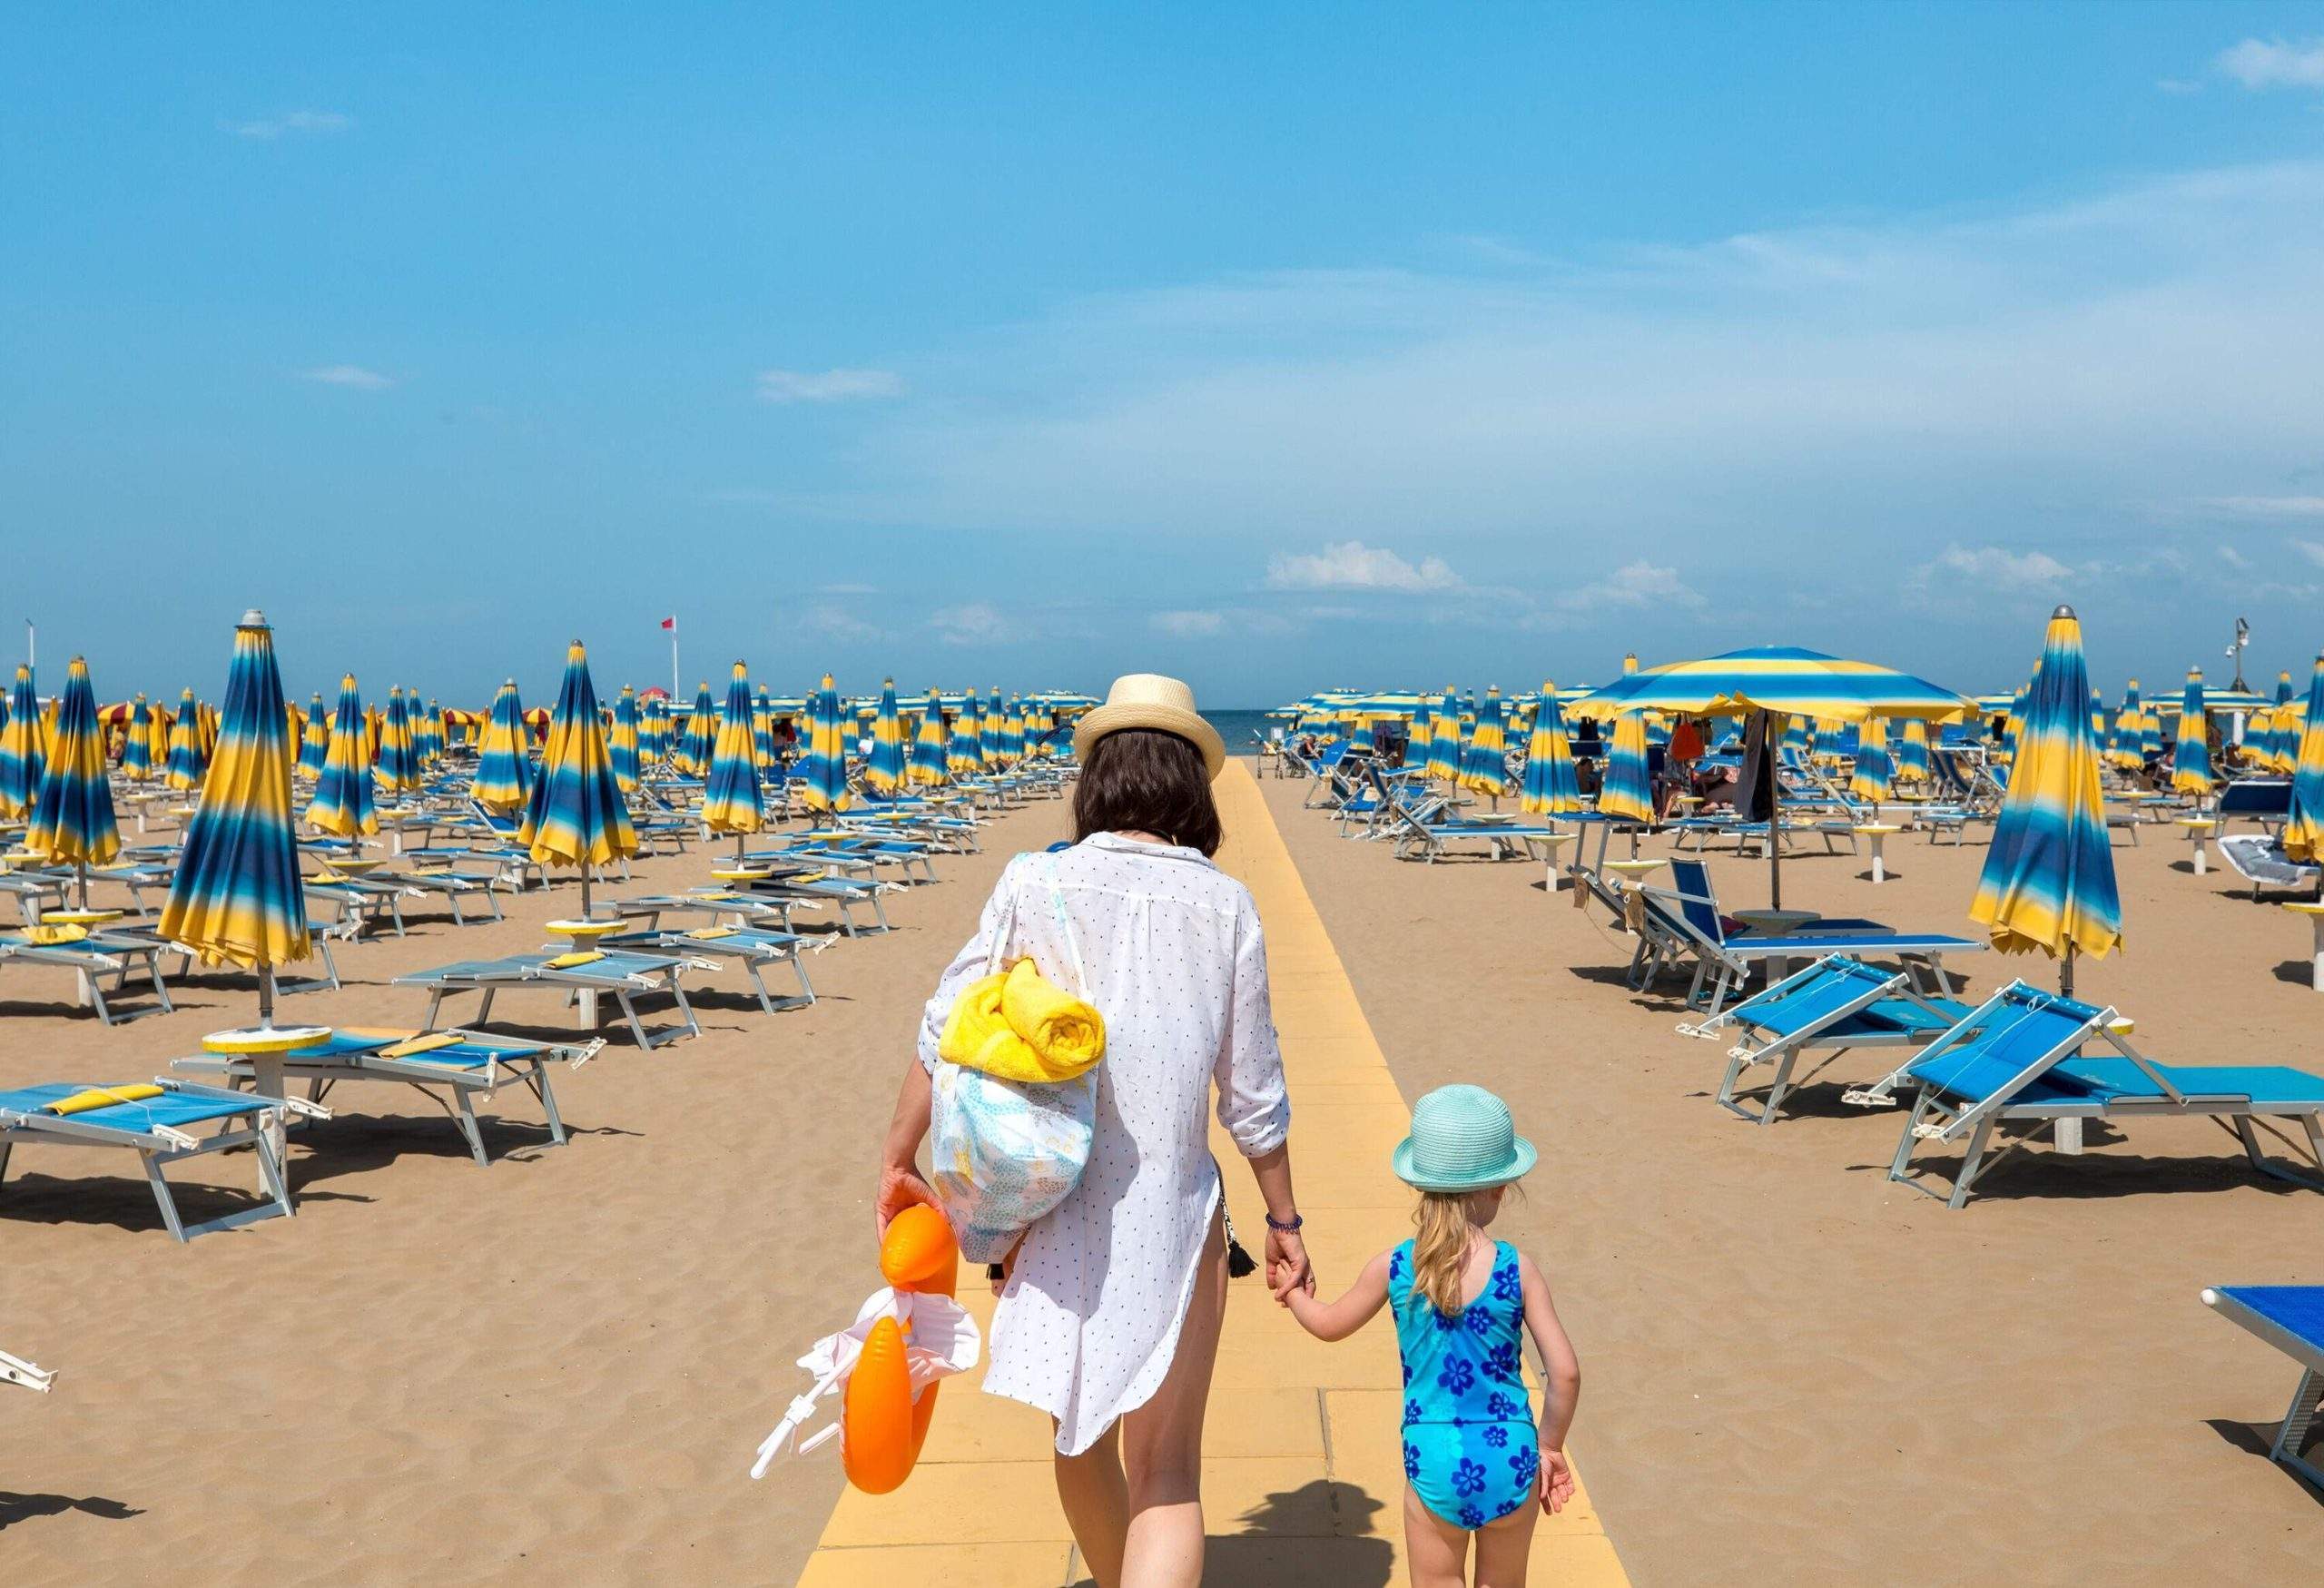 A woman holding a little girl's hand as they walk along the path across the beach strewn with umbrellas and loungers.